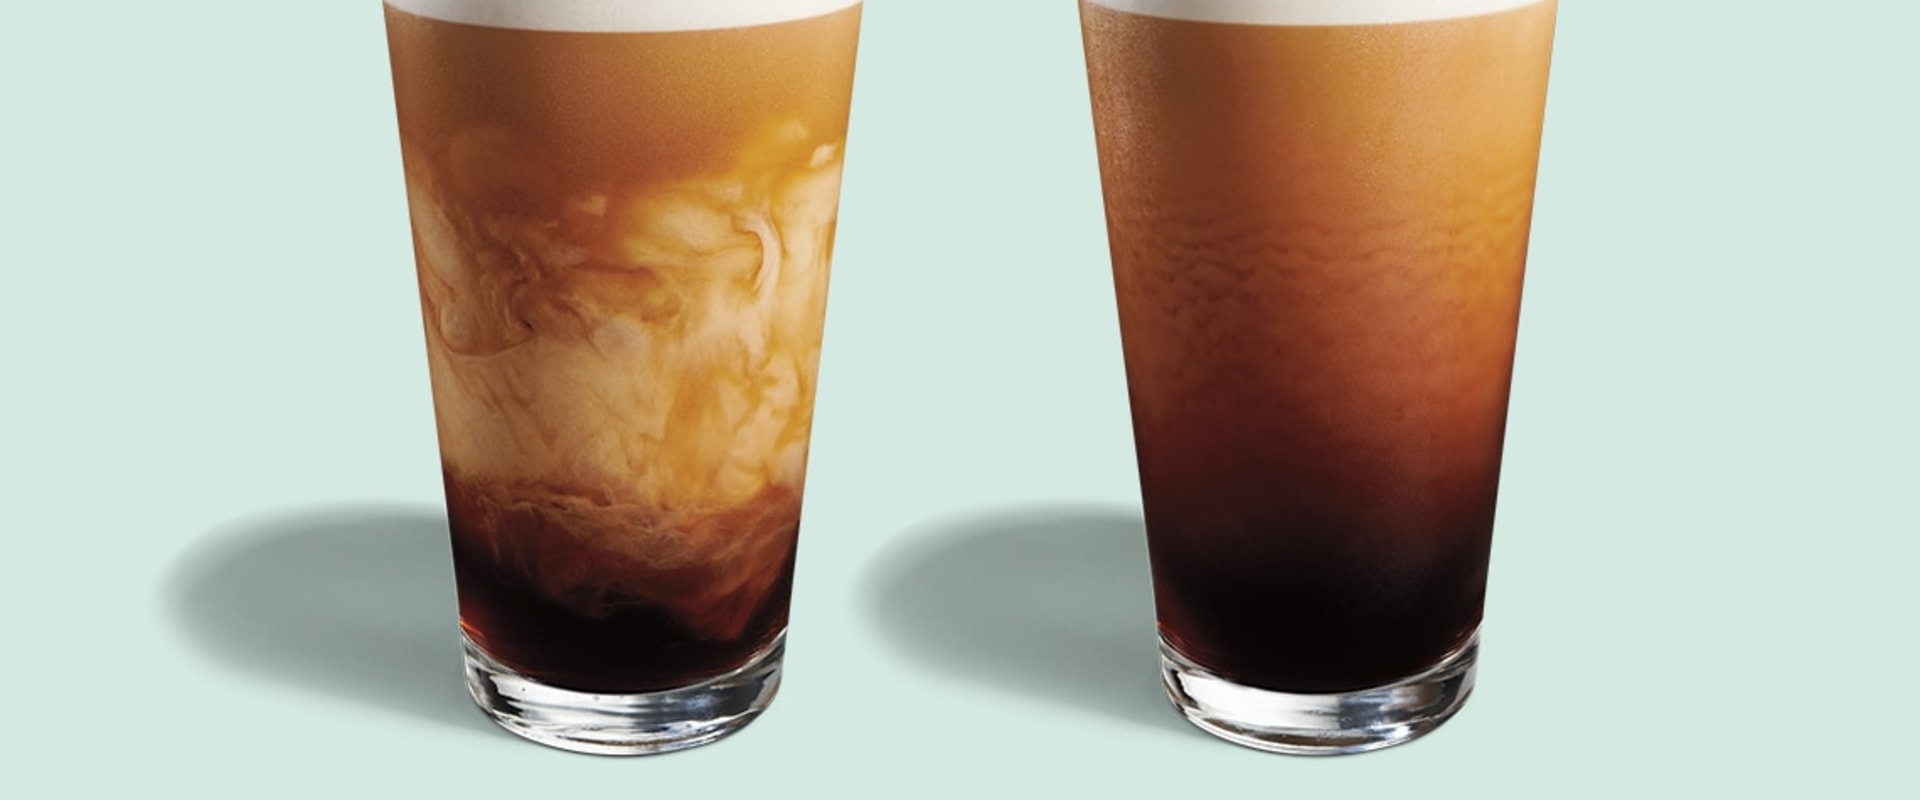 Does nitro cold brew contain dairy?